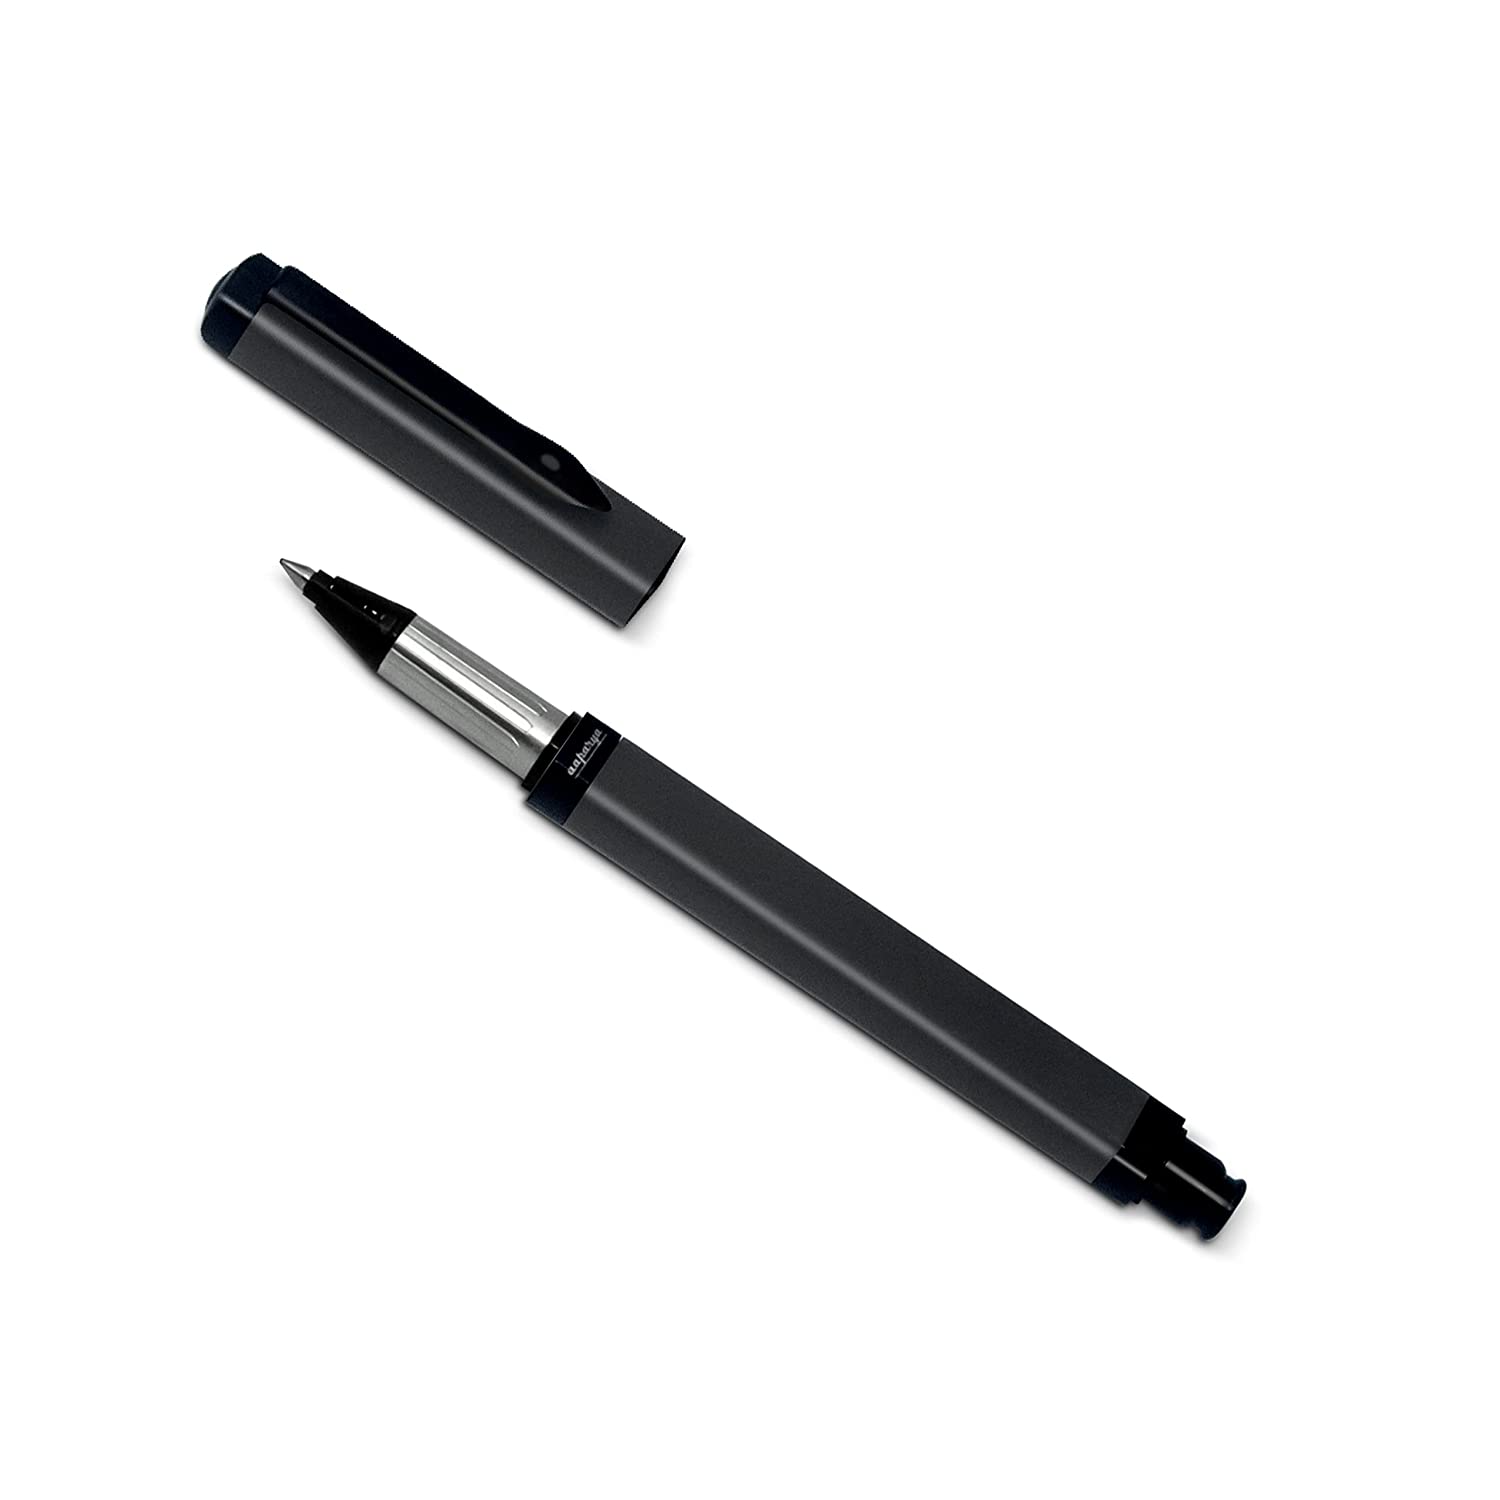 Aaparya Premium Square Roller Pen Matte Black Color, Designer & Luxury Pen with Genuine Leather Cover for Gift to loved ones